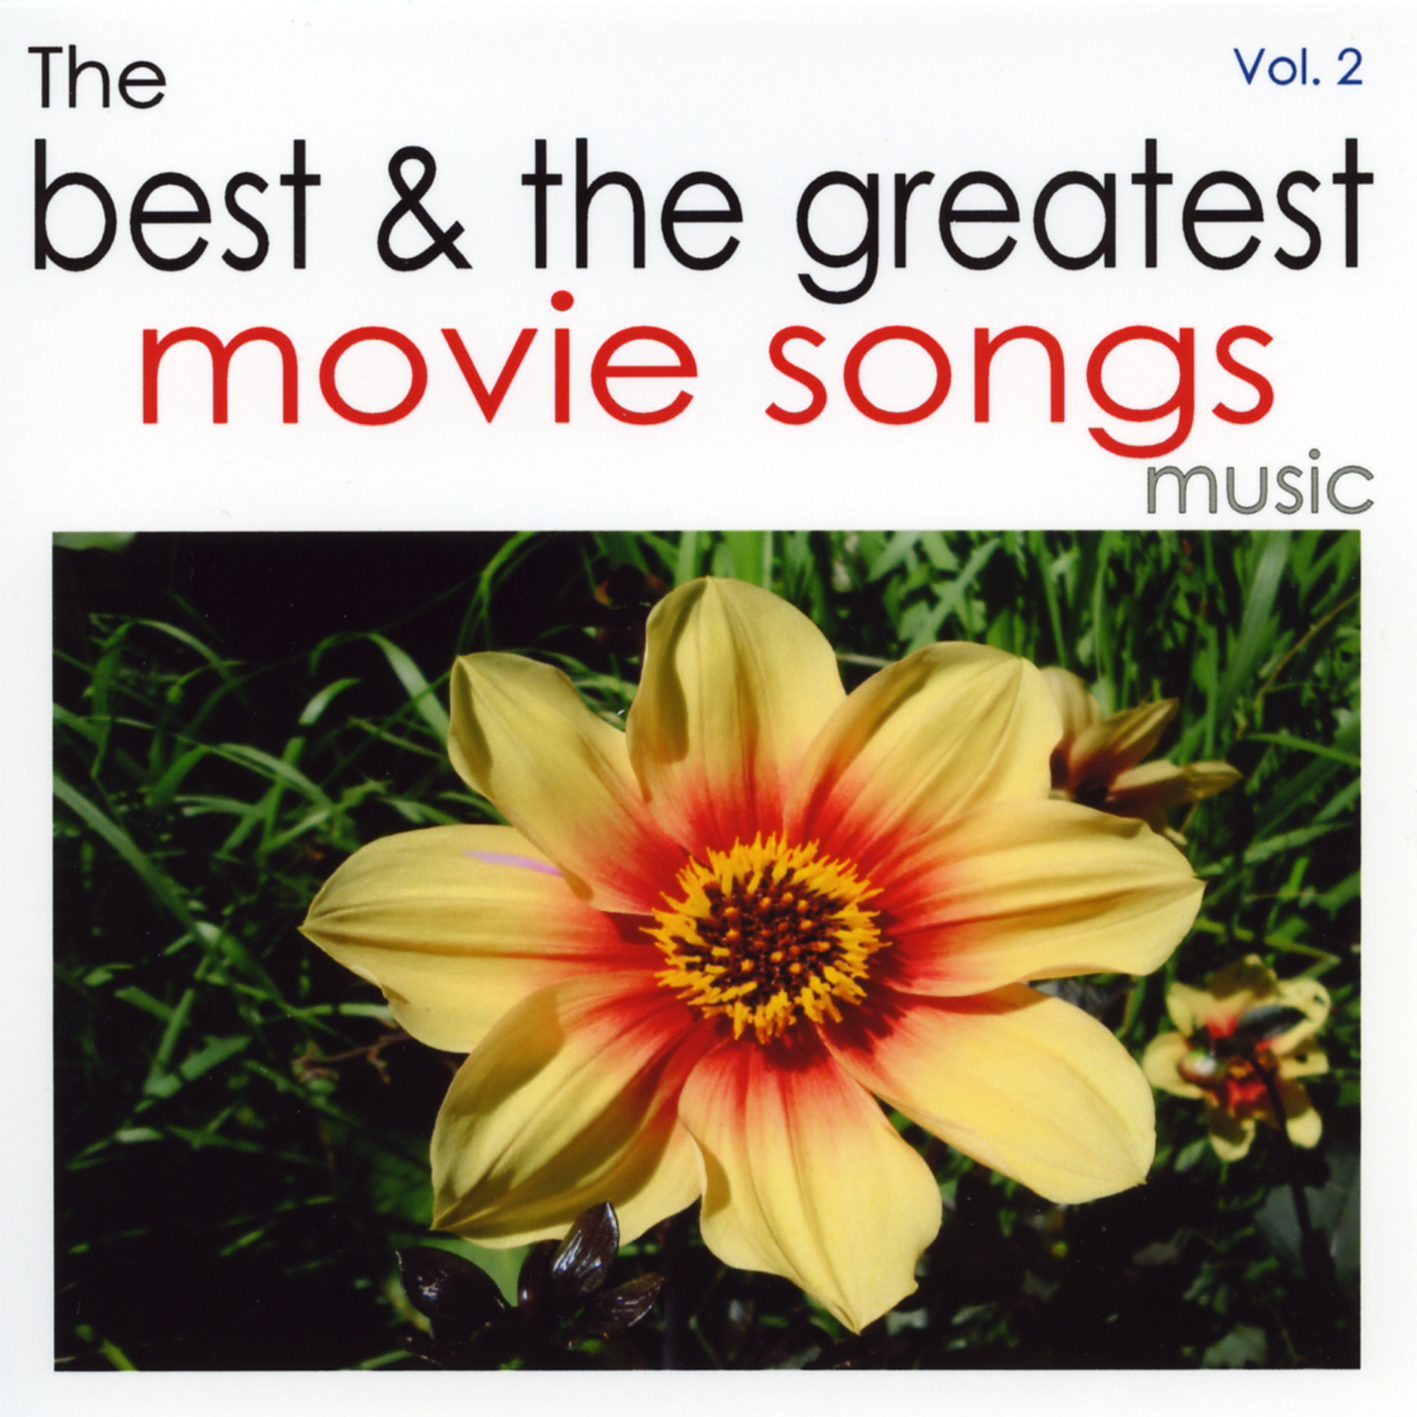 The Best & The Greatest Movie Songs Vol.2